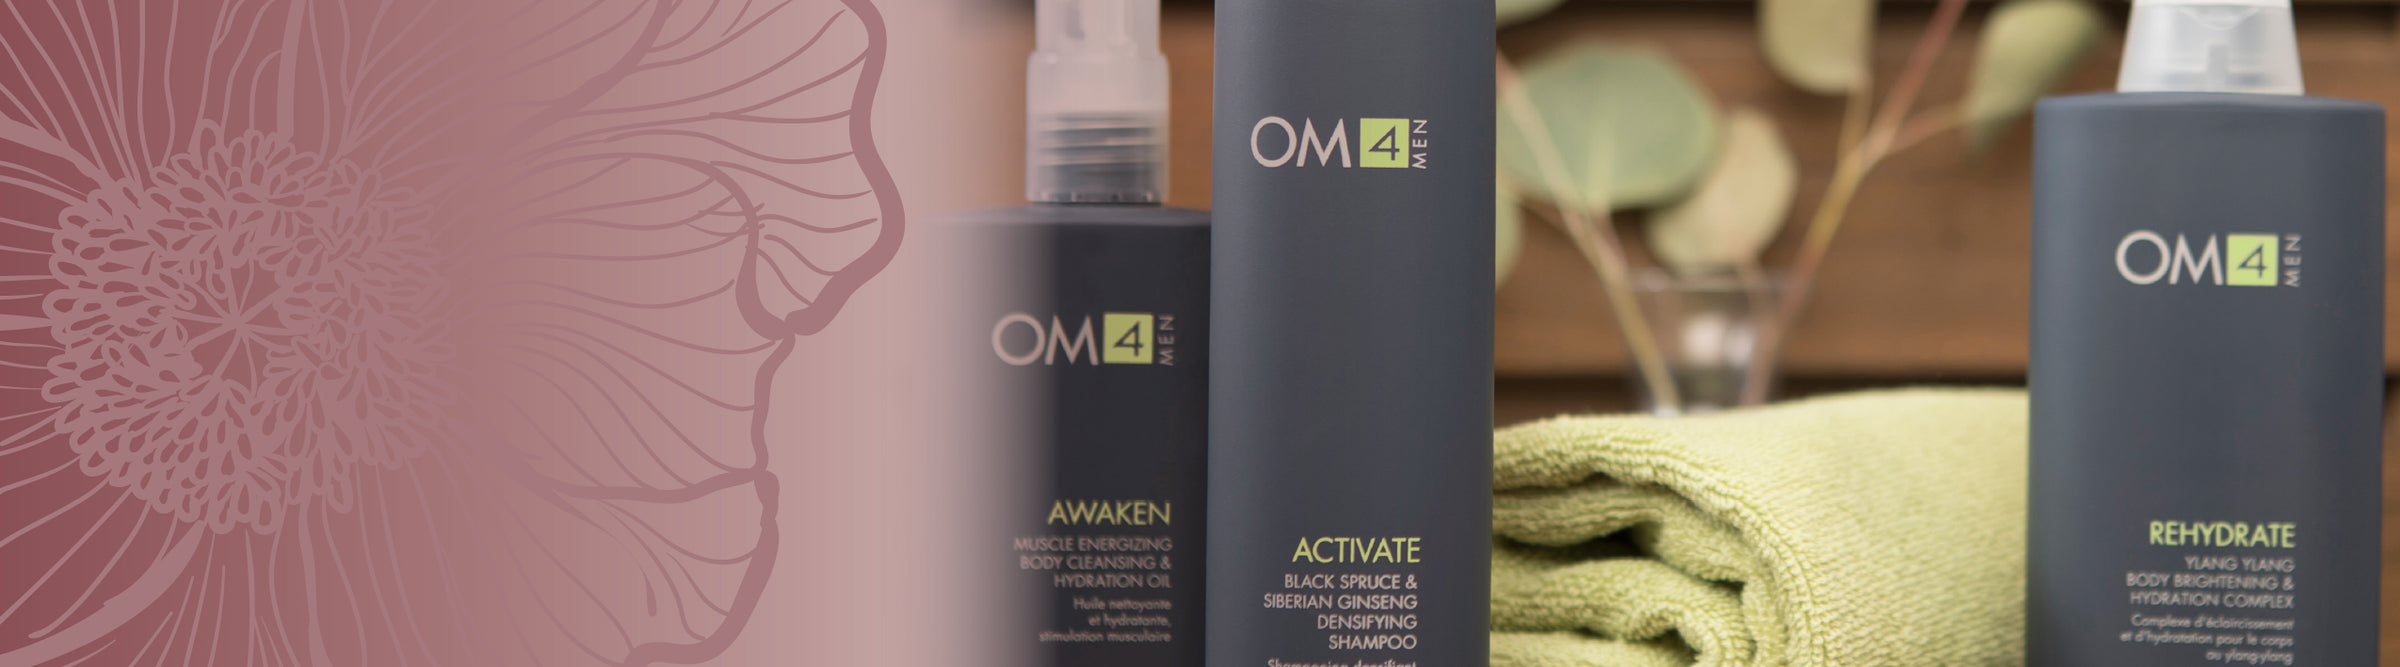 OM4 Organic Male - Well Being